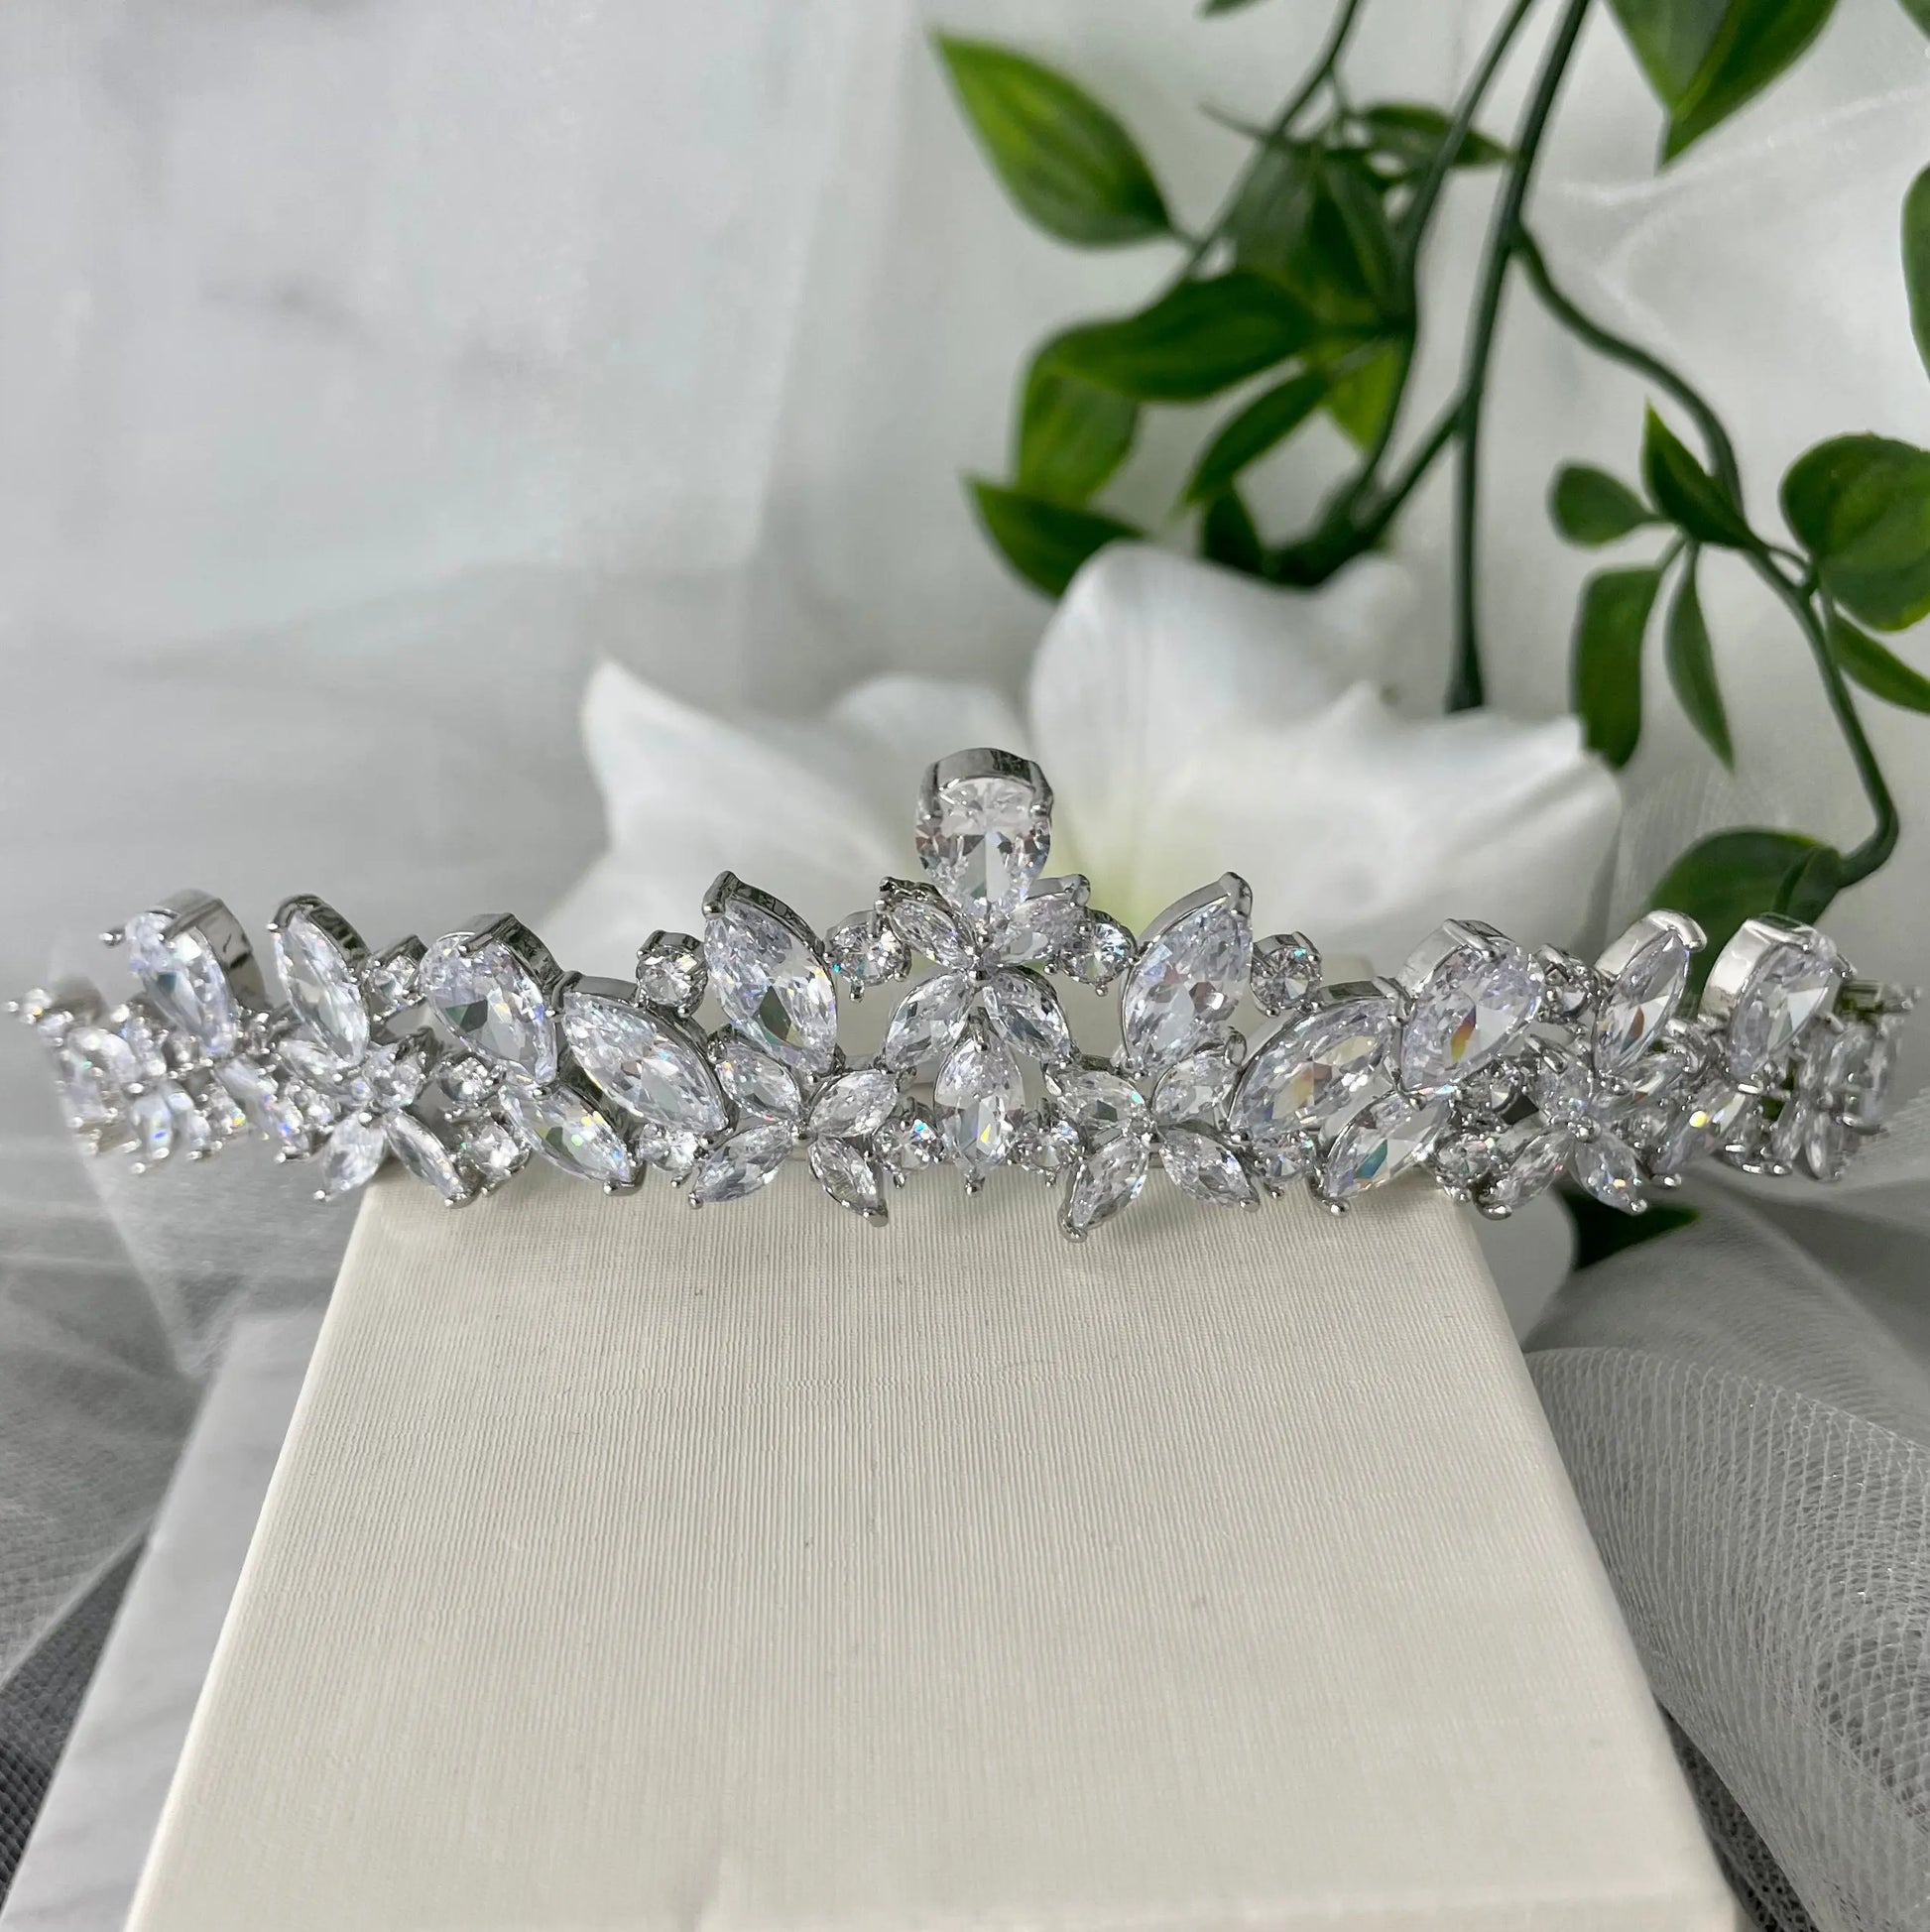 Patricia Bridal Tiara showcasing a floral and teardrop leaf design with sparkling crystals, perfect for adding luxury and elegance to any bridal look.